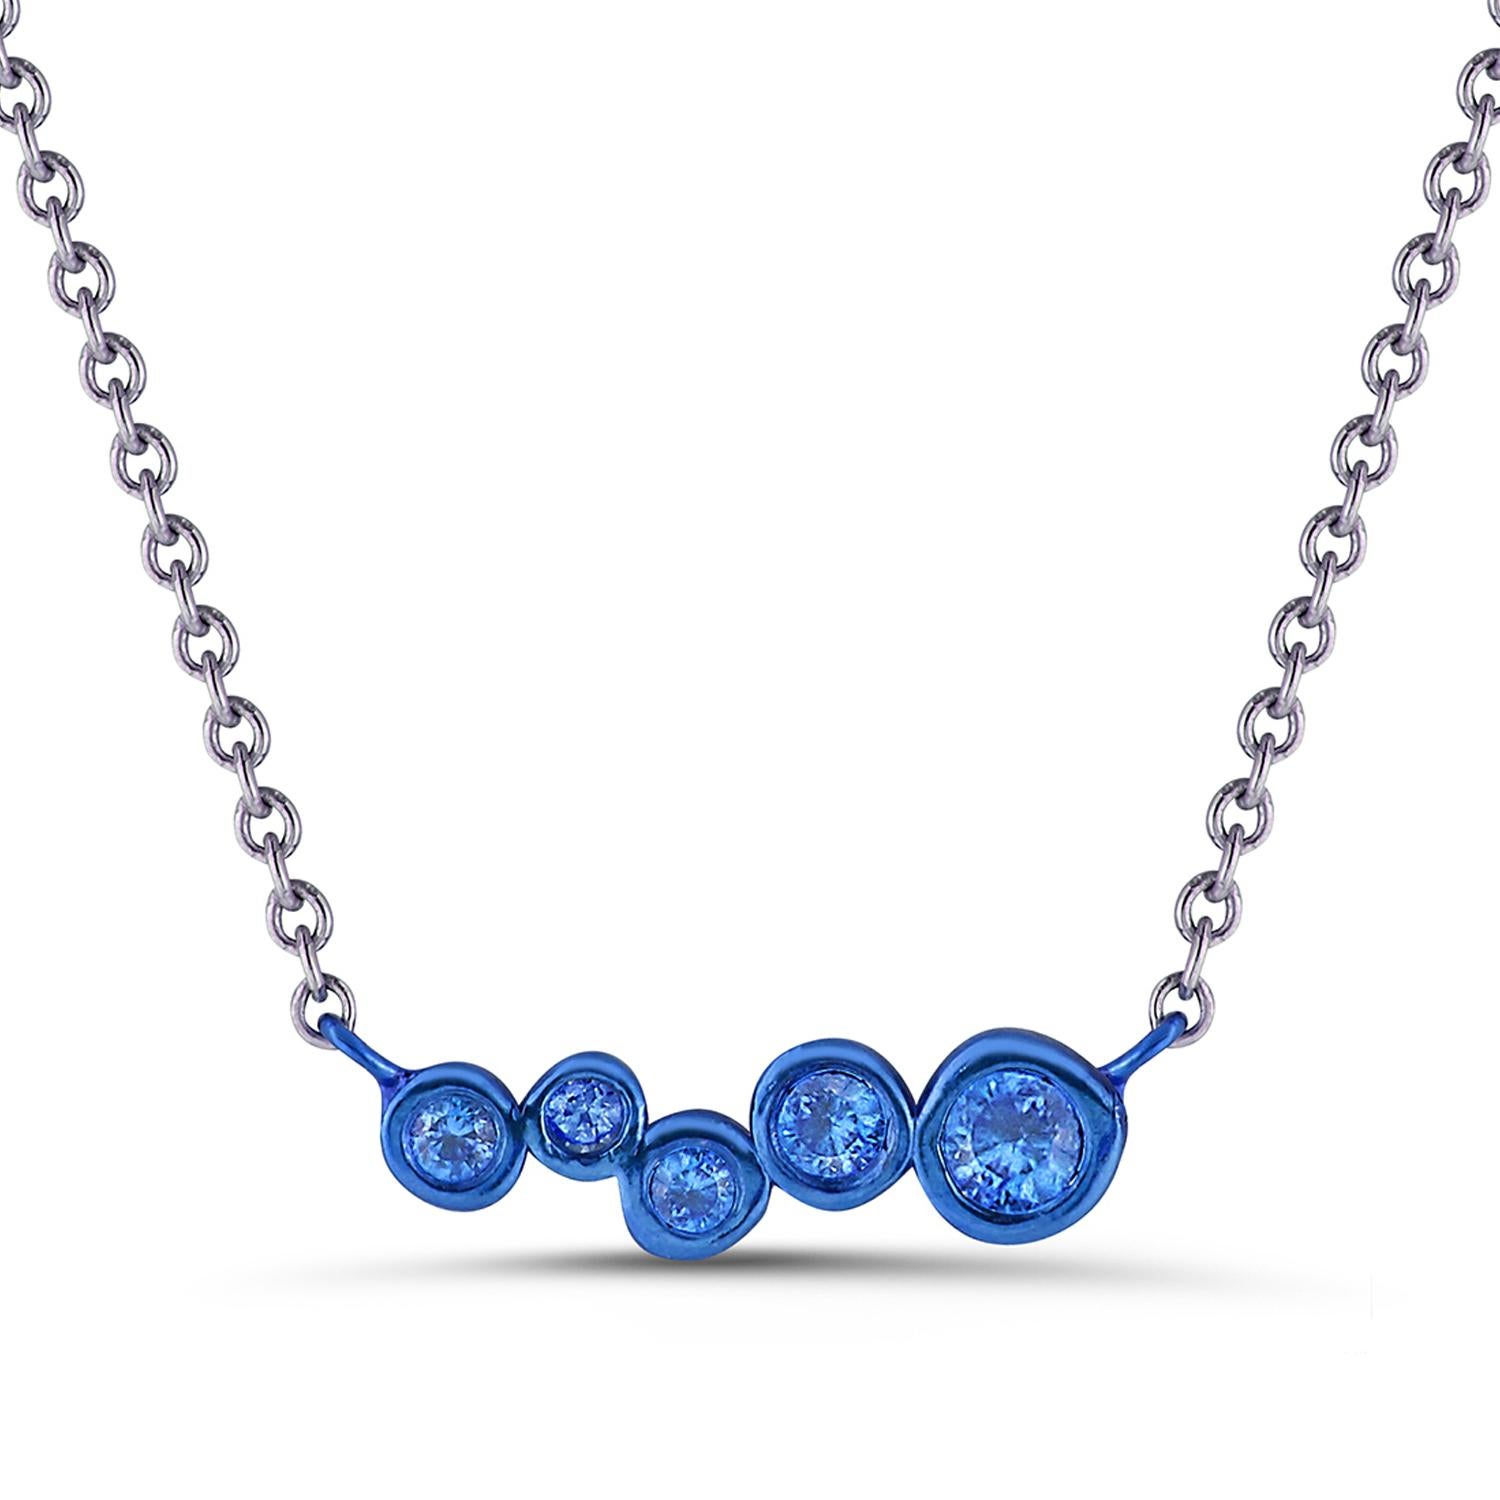 Hi June Parker's version of the classic bar pendant sprinkled with tapering sizes of Blue Sapphires ceramic plated with a deep Blue to add a pop of electric color to your neck.

Inspired by seeing the cross-section view of life, as if slicing a tree